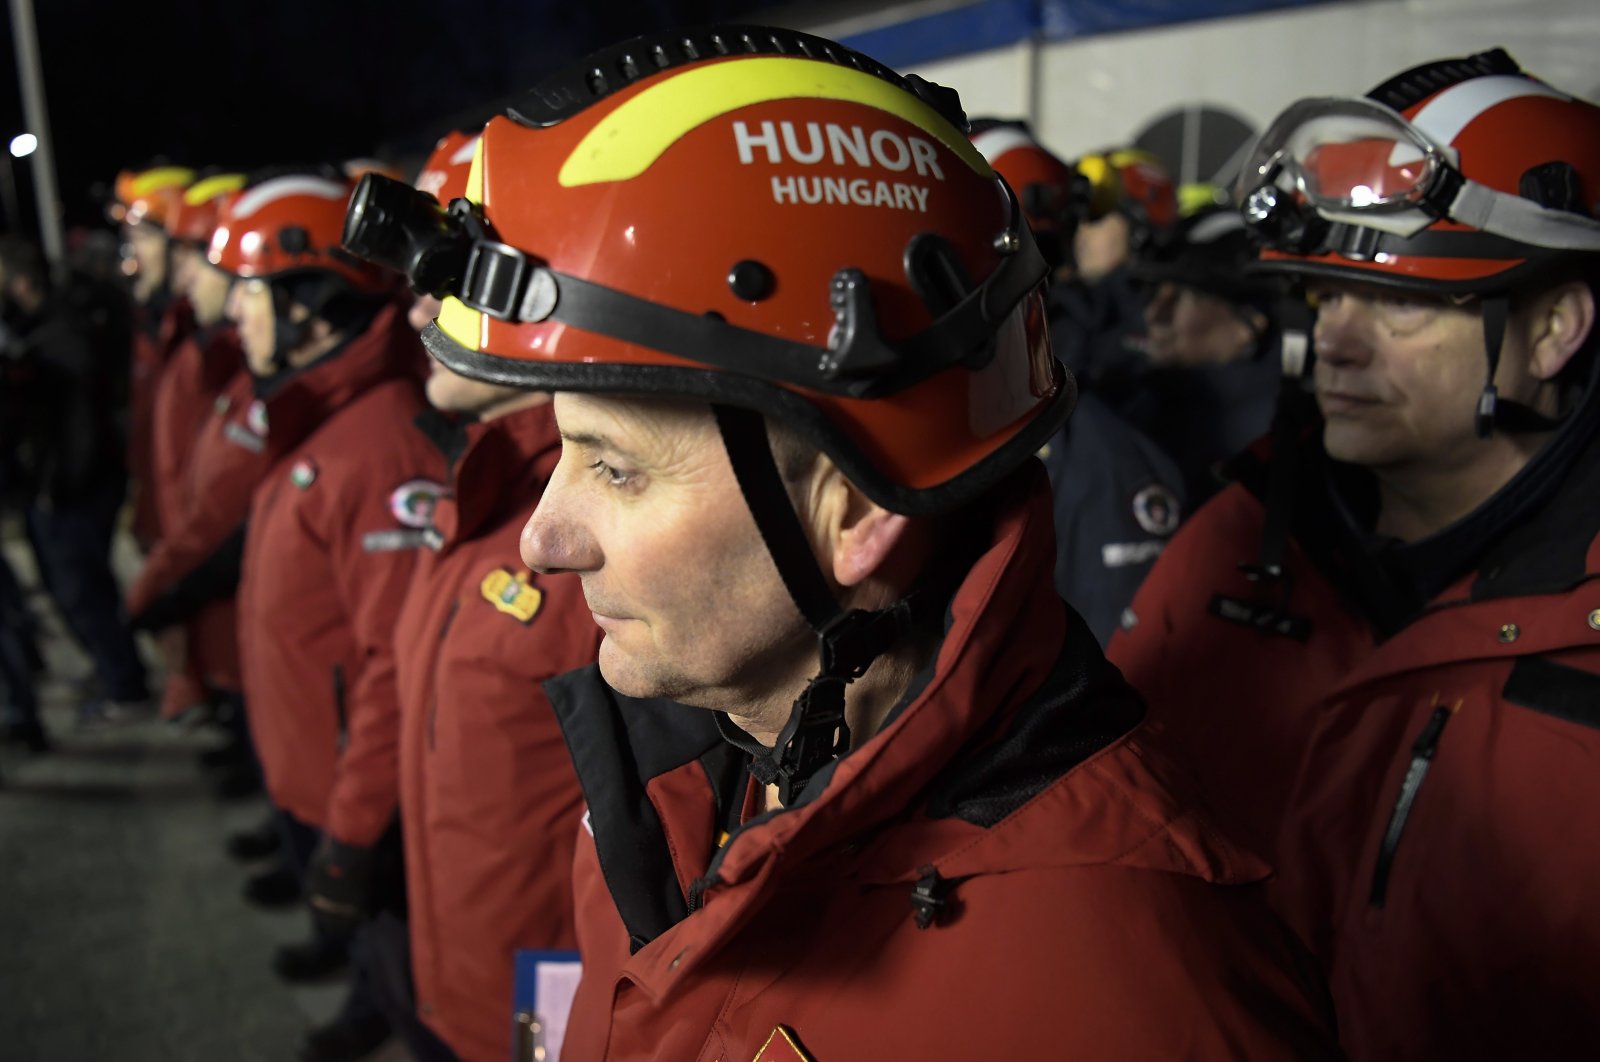 Rescuers are seen before the departure of 50 members of the HUNOR Hungarian Rescue Team to the earthquake-hit Türkiye, Budapest, Hungary, Feb. 6, 2023. (EPA Photo)